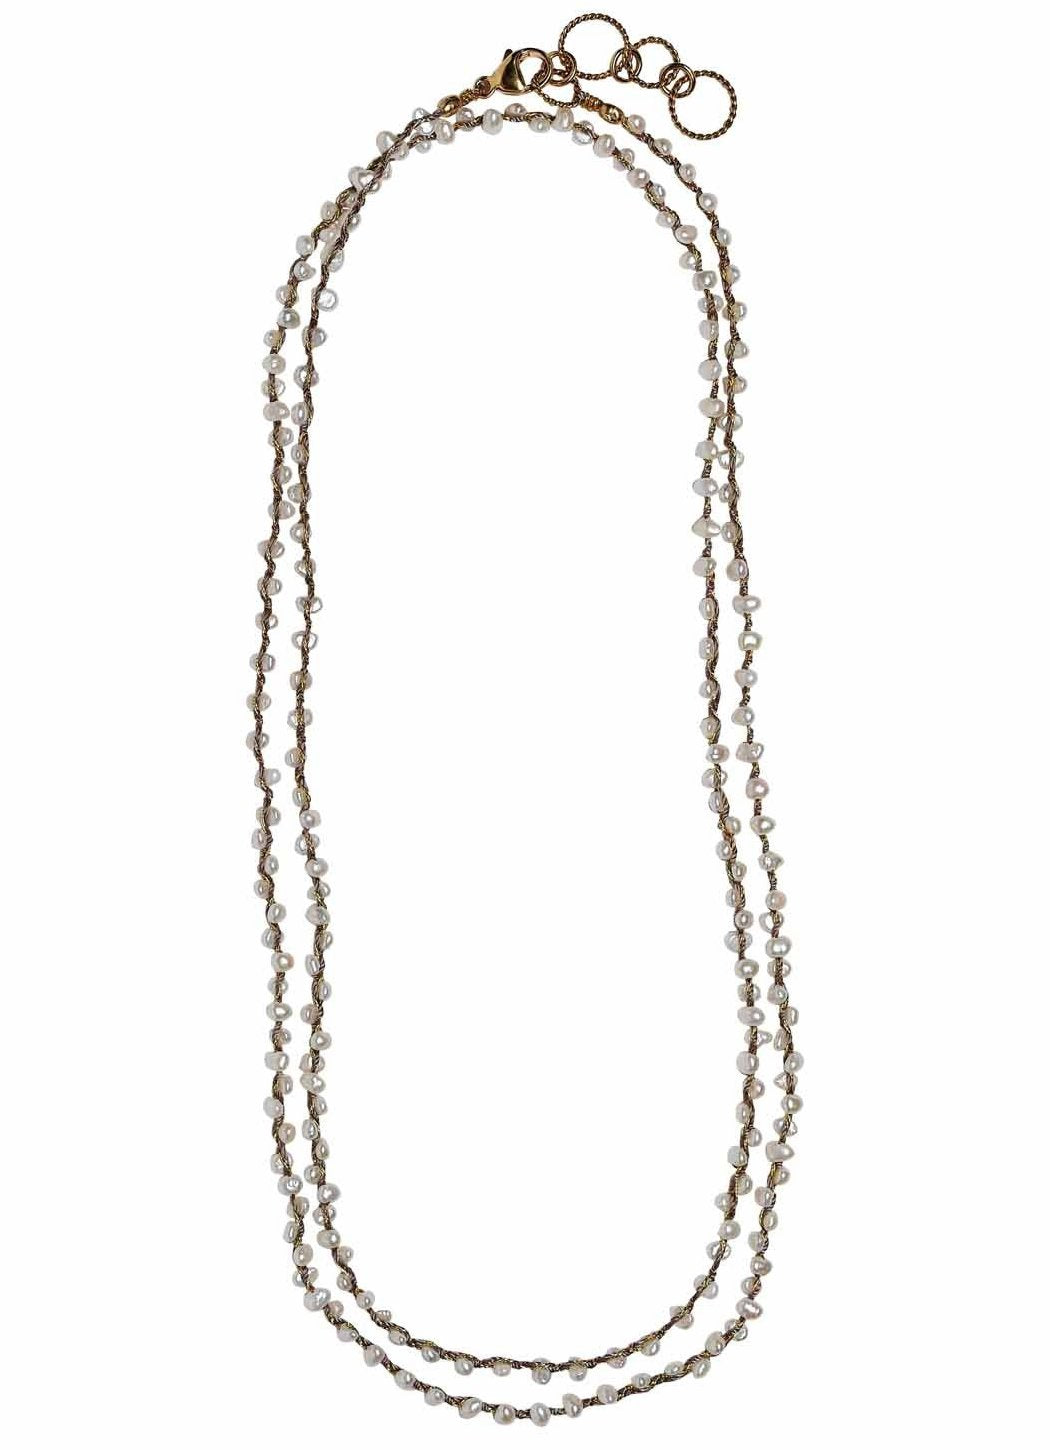 Woven Long Necklace in Pearl | Cluster Weave